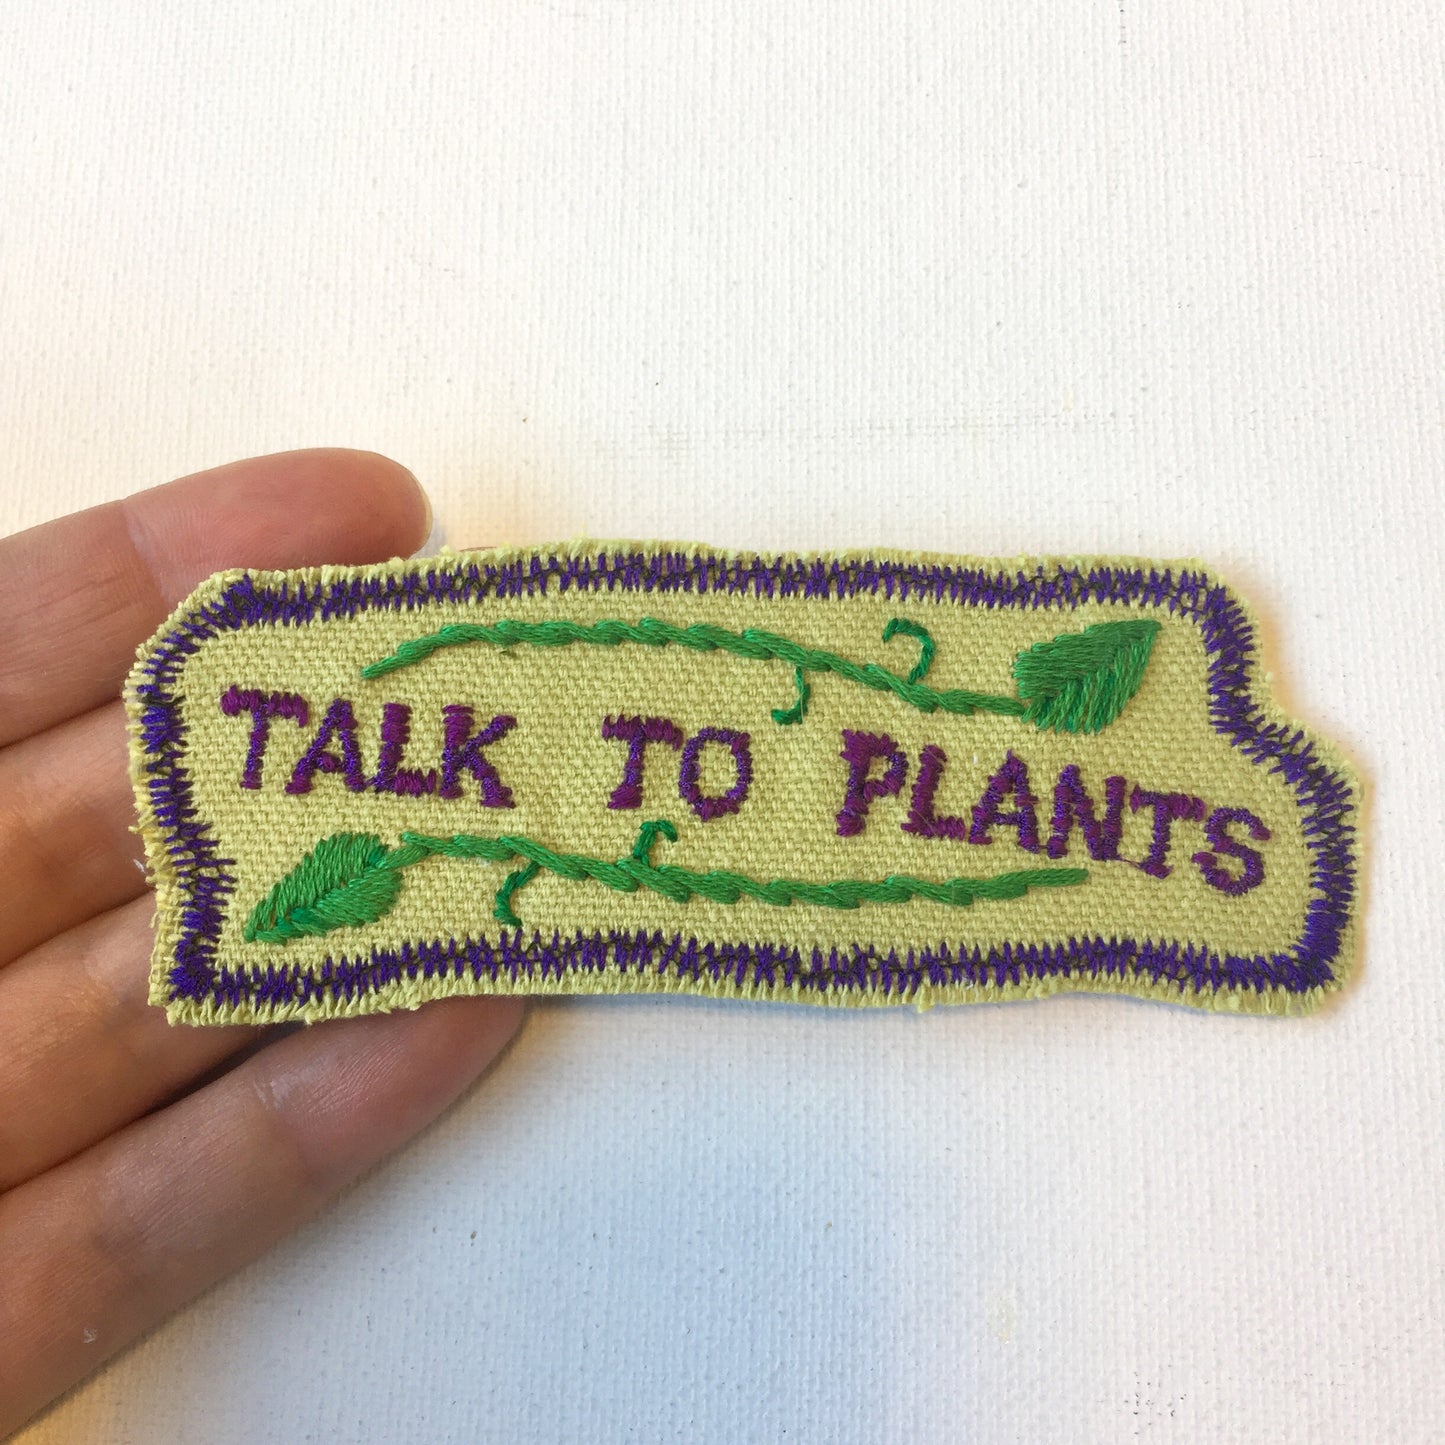 Talk 2 Plants. Handmade Embroidered Canvas Patch.